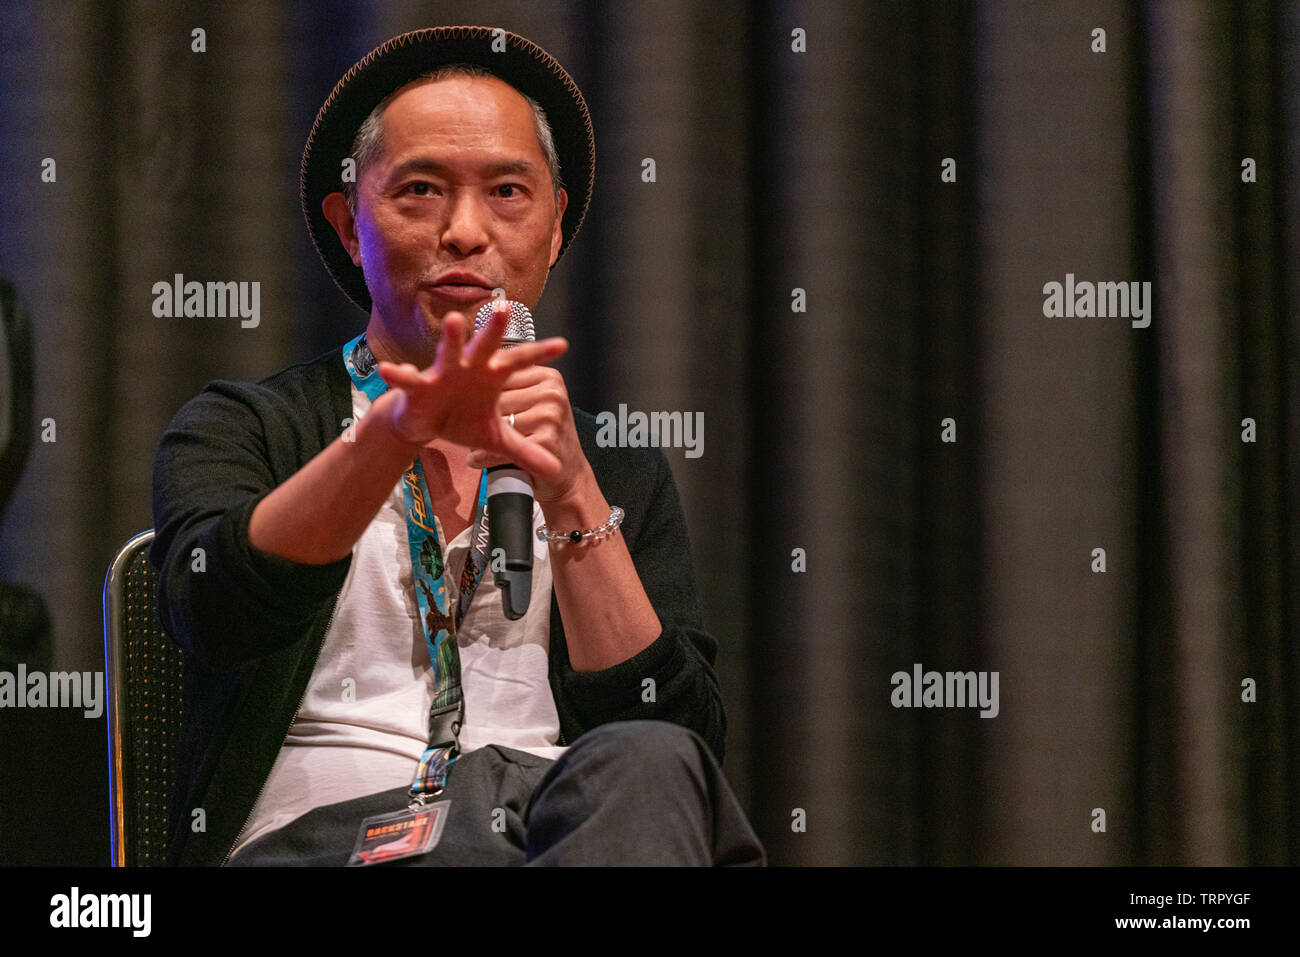 Bonn, Germany - June 8 2019: Ken Leung (*1970, American actor - Star Wars, LOST) talks about his experiences in the movie industry at FedCon 28 Stock Photo